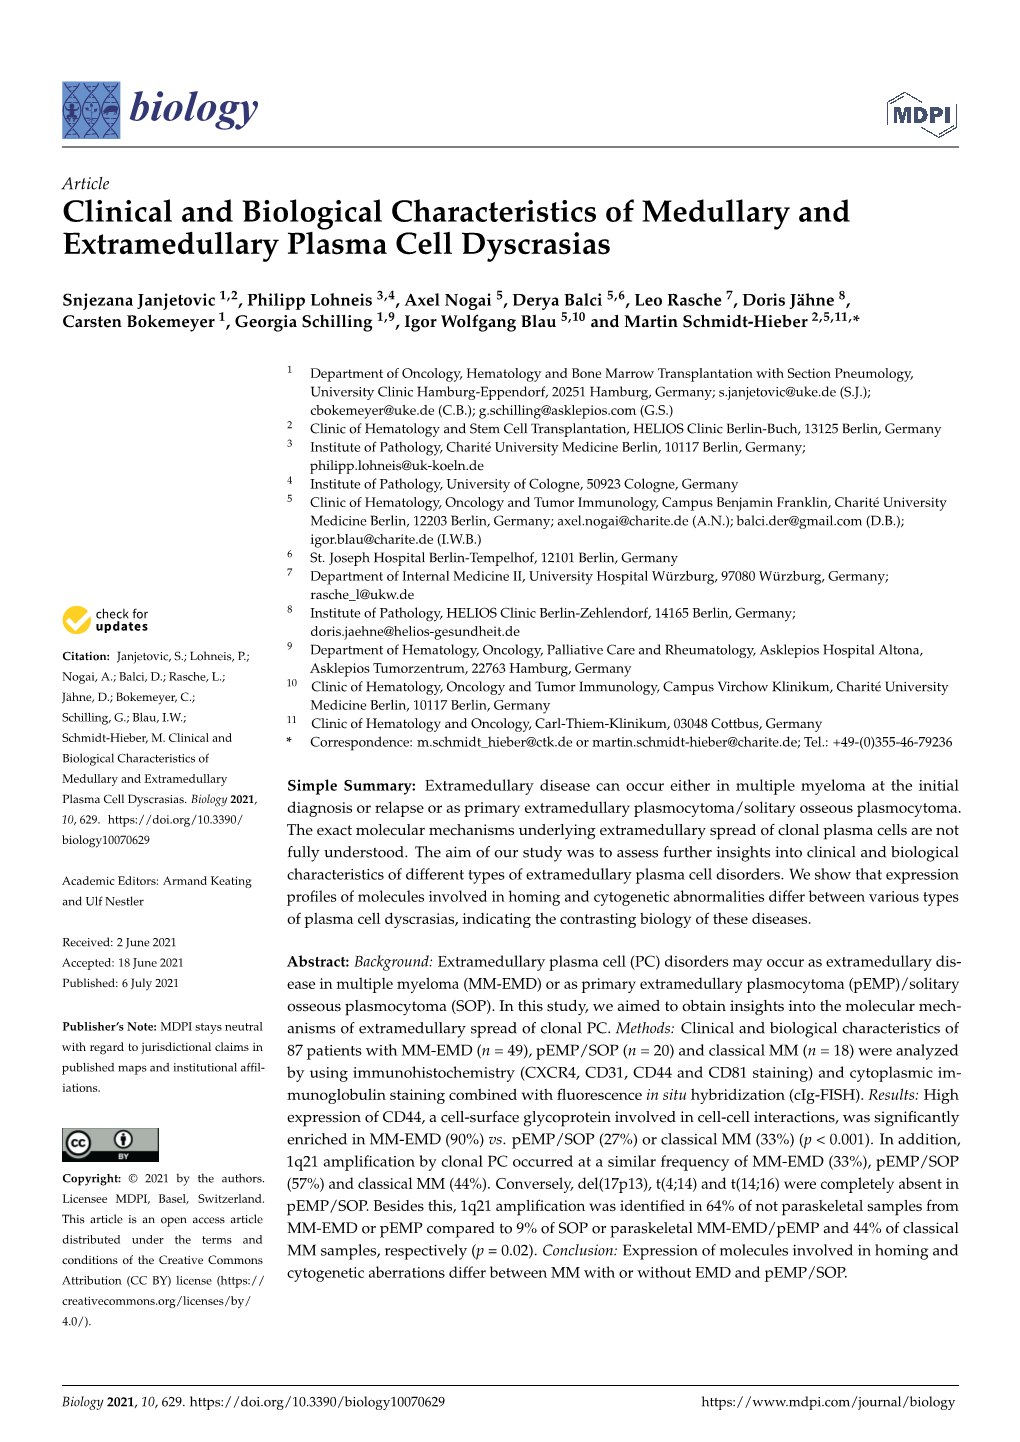 Clinical and Biological Characteristics of Medullary and Extramedullary Plasma Cell Dyscrasias